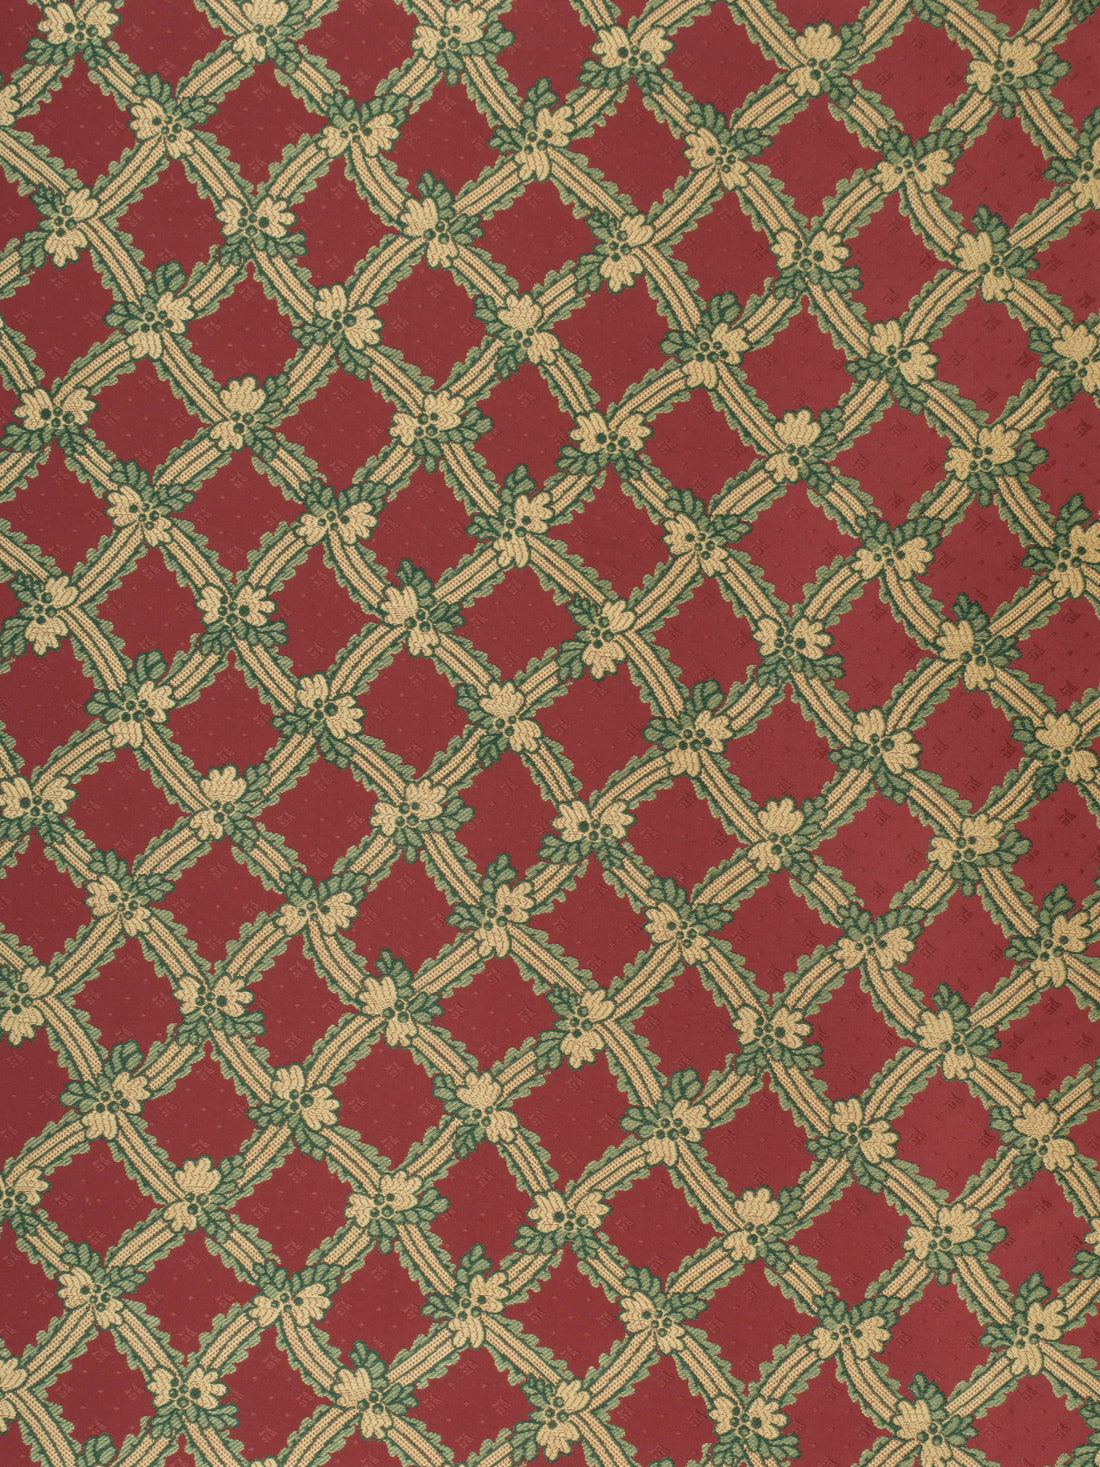 Cannage Tiepolo fabric in red color - pattern number M0 00051397 - by Scalamandre in the Old World Weavers collection